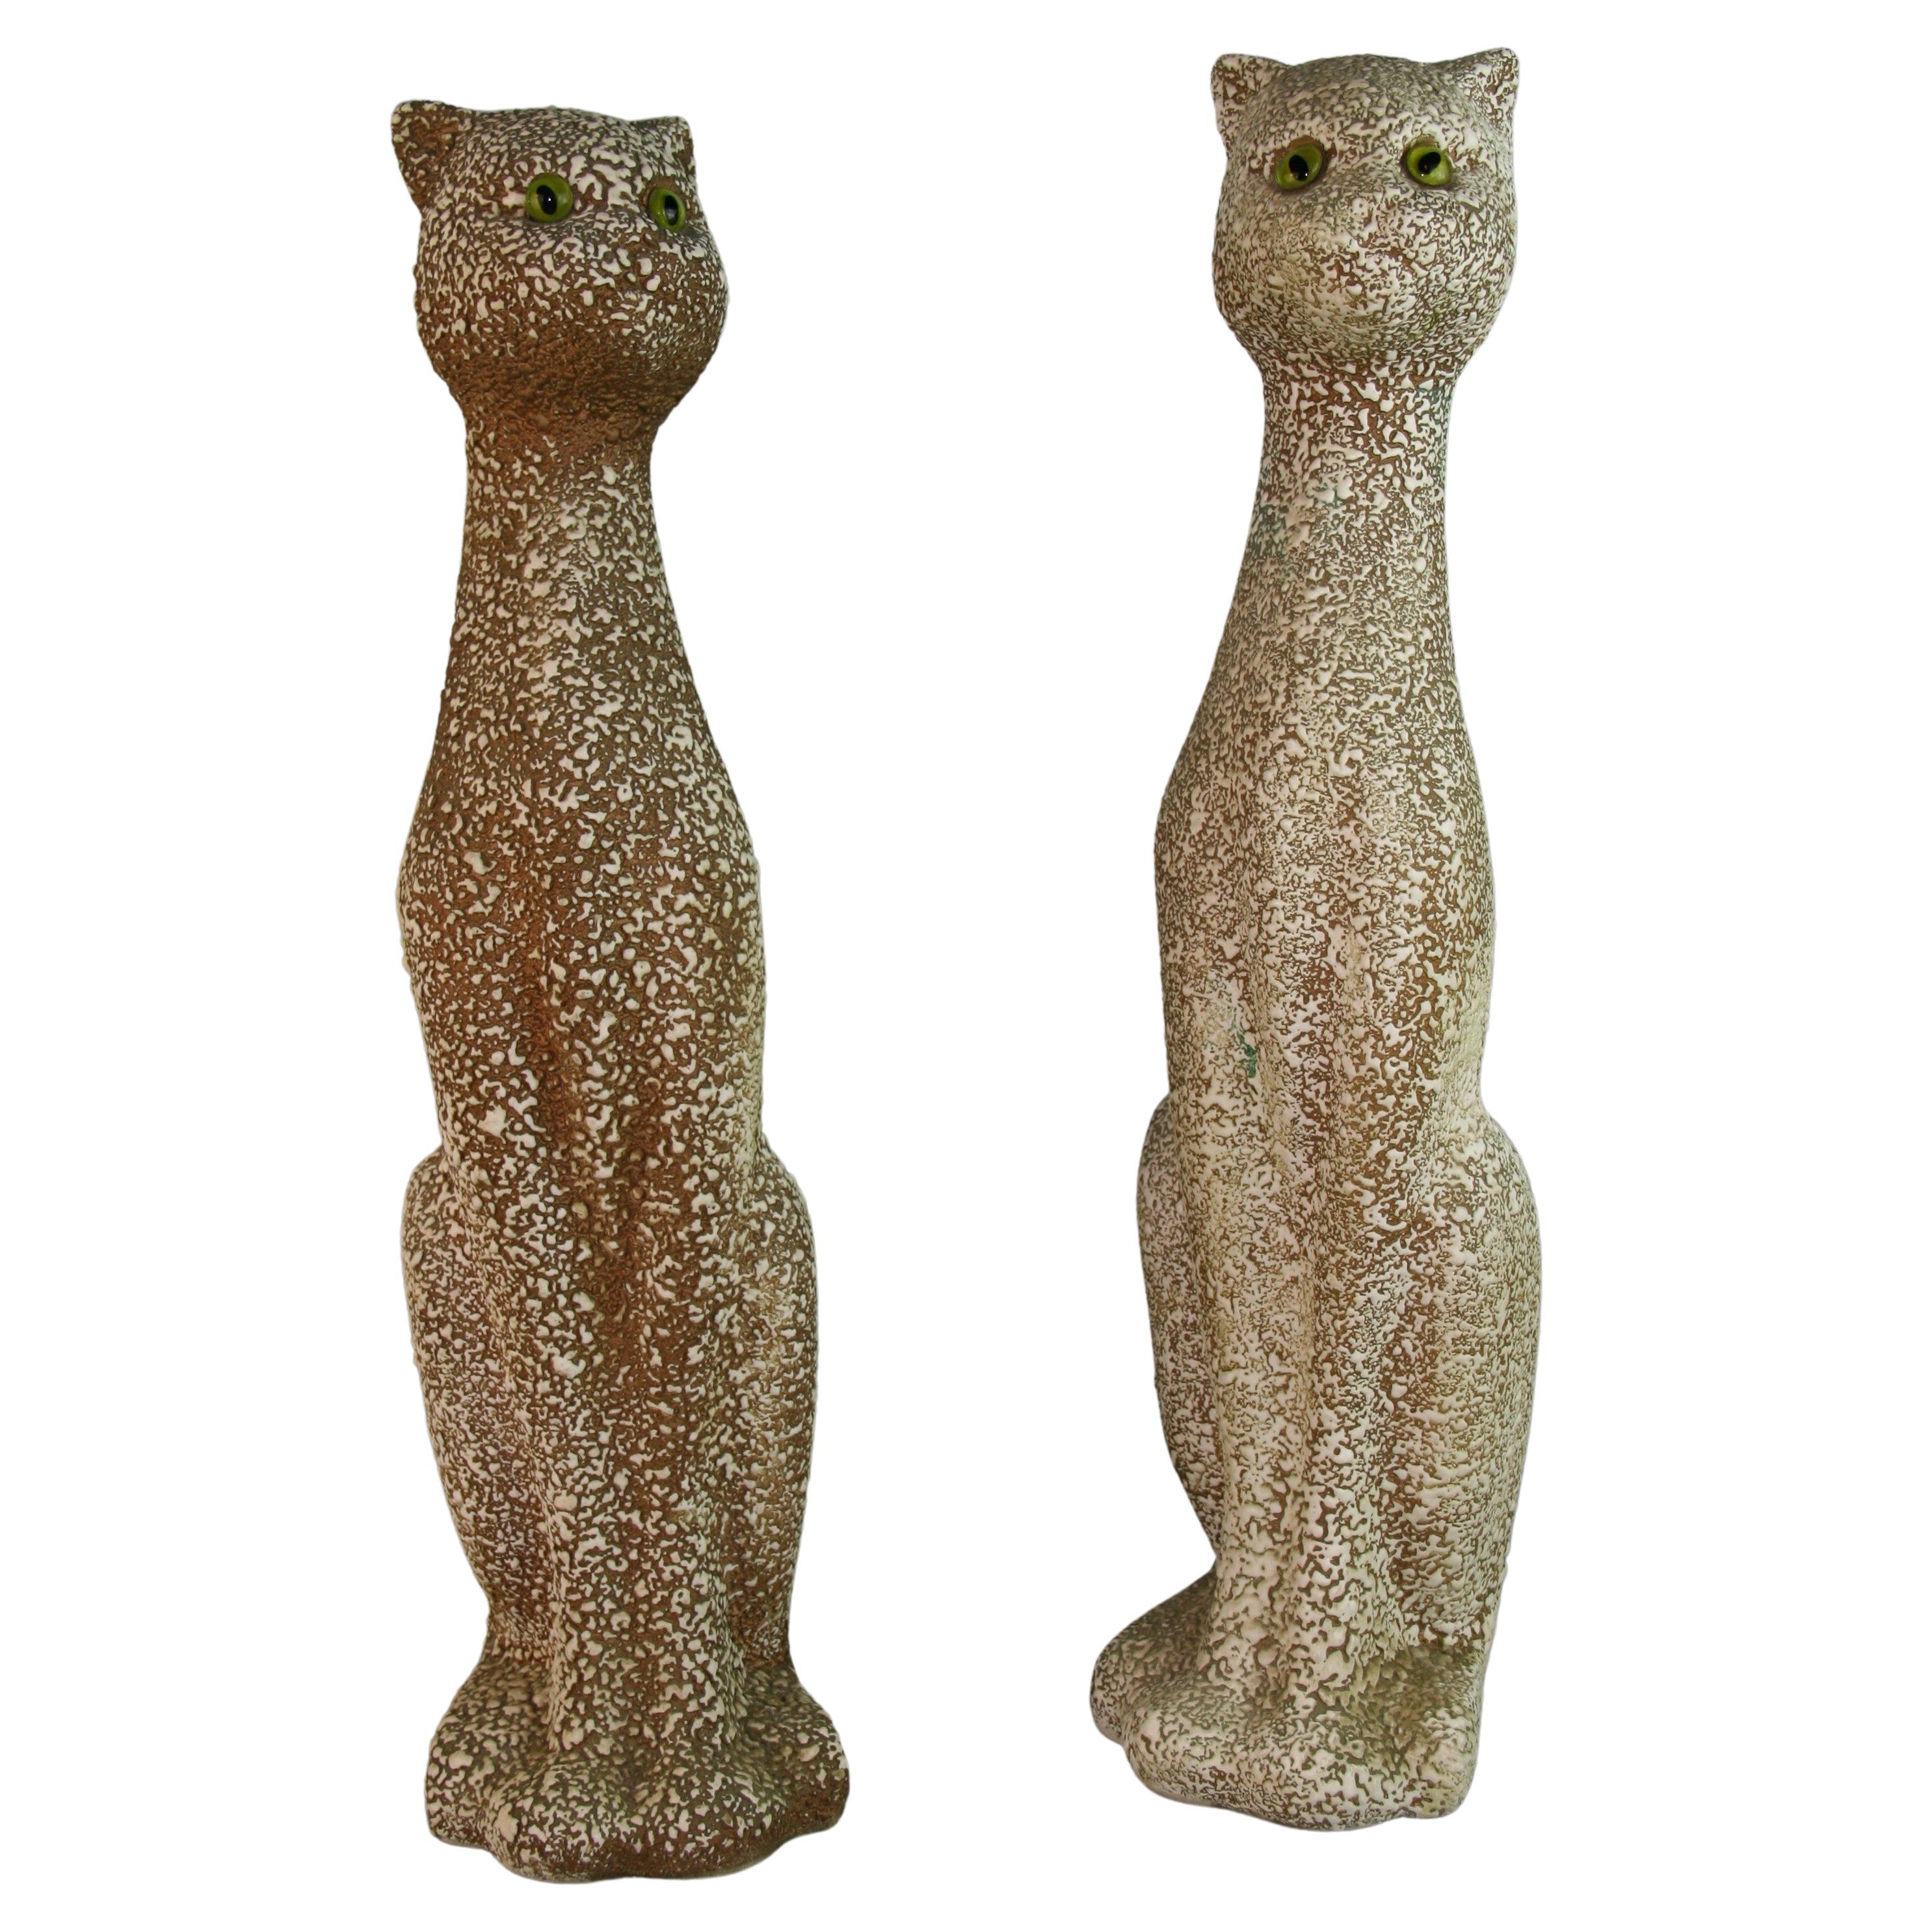 Matched Pair Oversized French Ceramic Cats Sculpture  with Glass Eyes